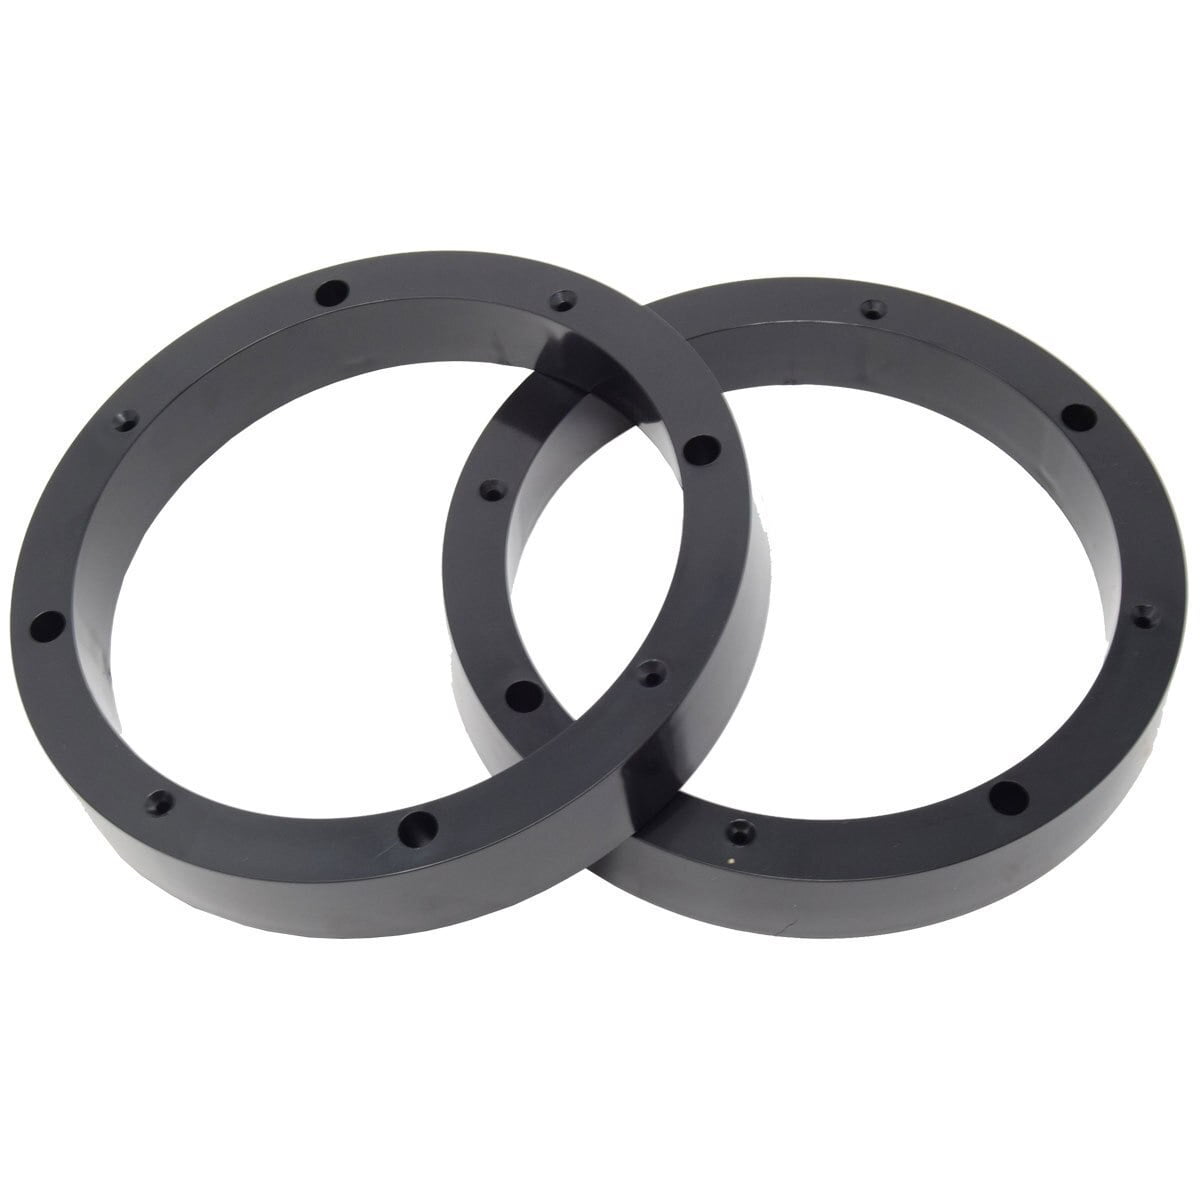 6.5 X-LARGE 6MM" Thick One Pair Made in USA PVC Plastic Speaker Spacer Rings 